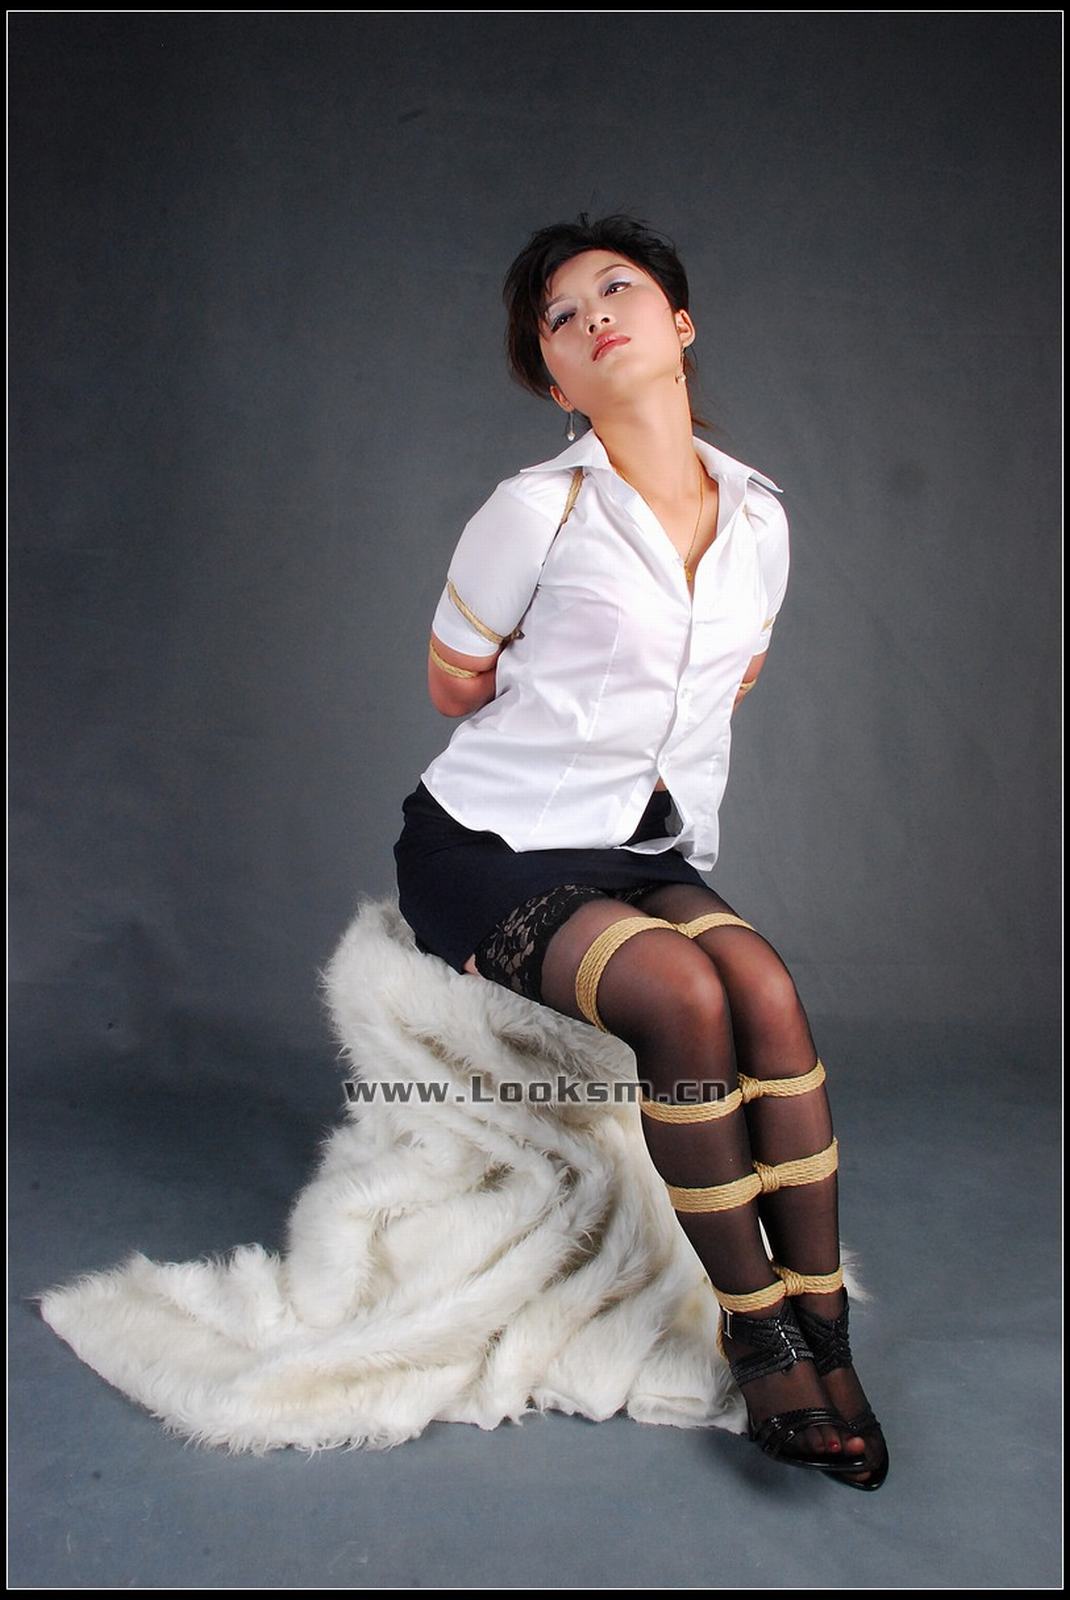 Chinese Rope Model 321